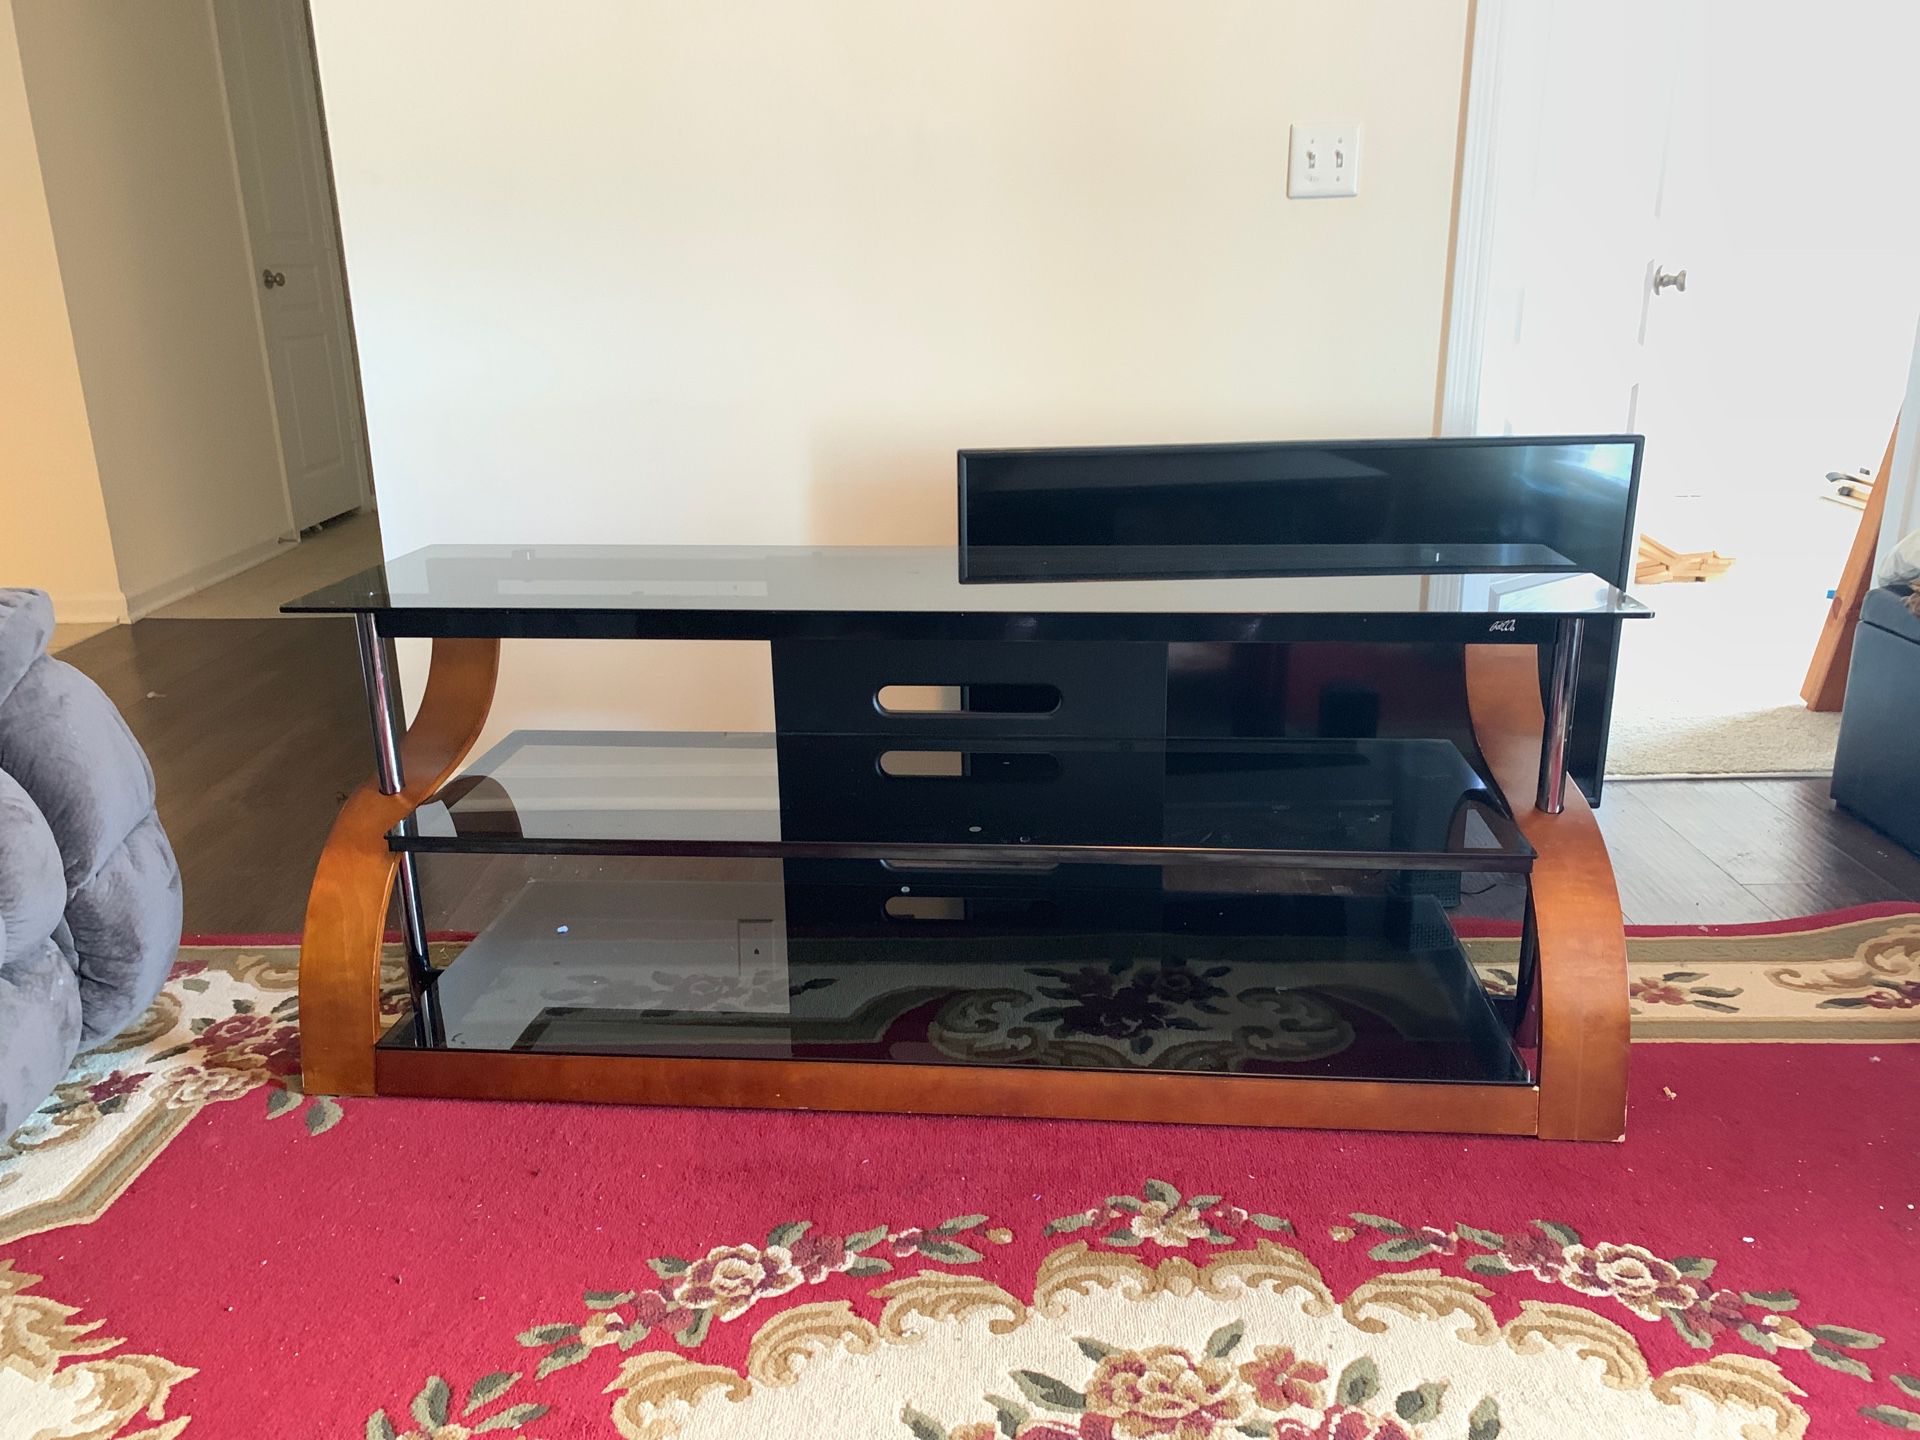 1TV Stands for sales!! Not TV’s stands only!!! One holds a 60 inch and the other a 50 inch TV!!